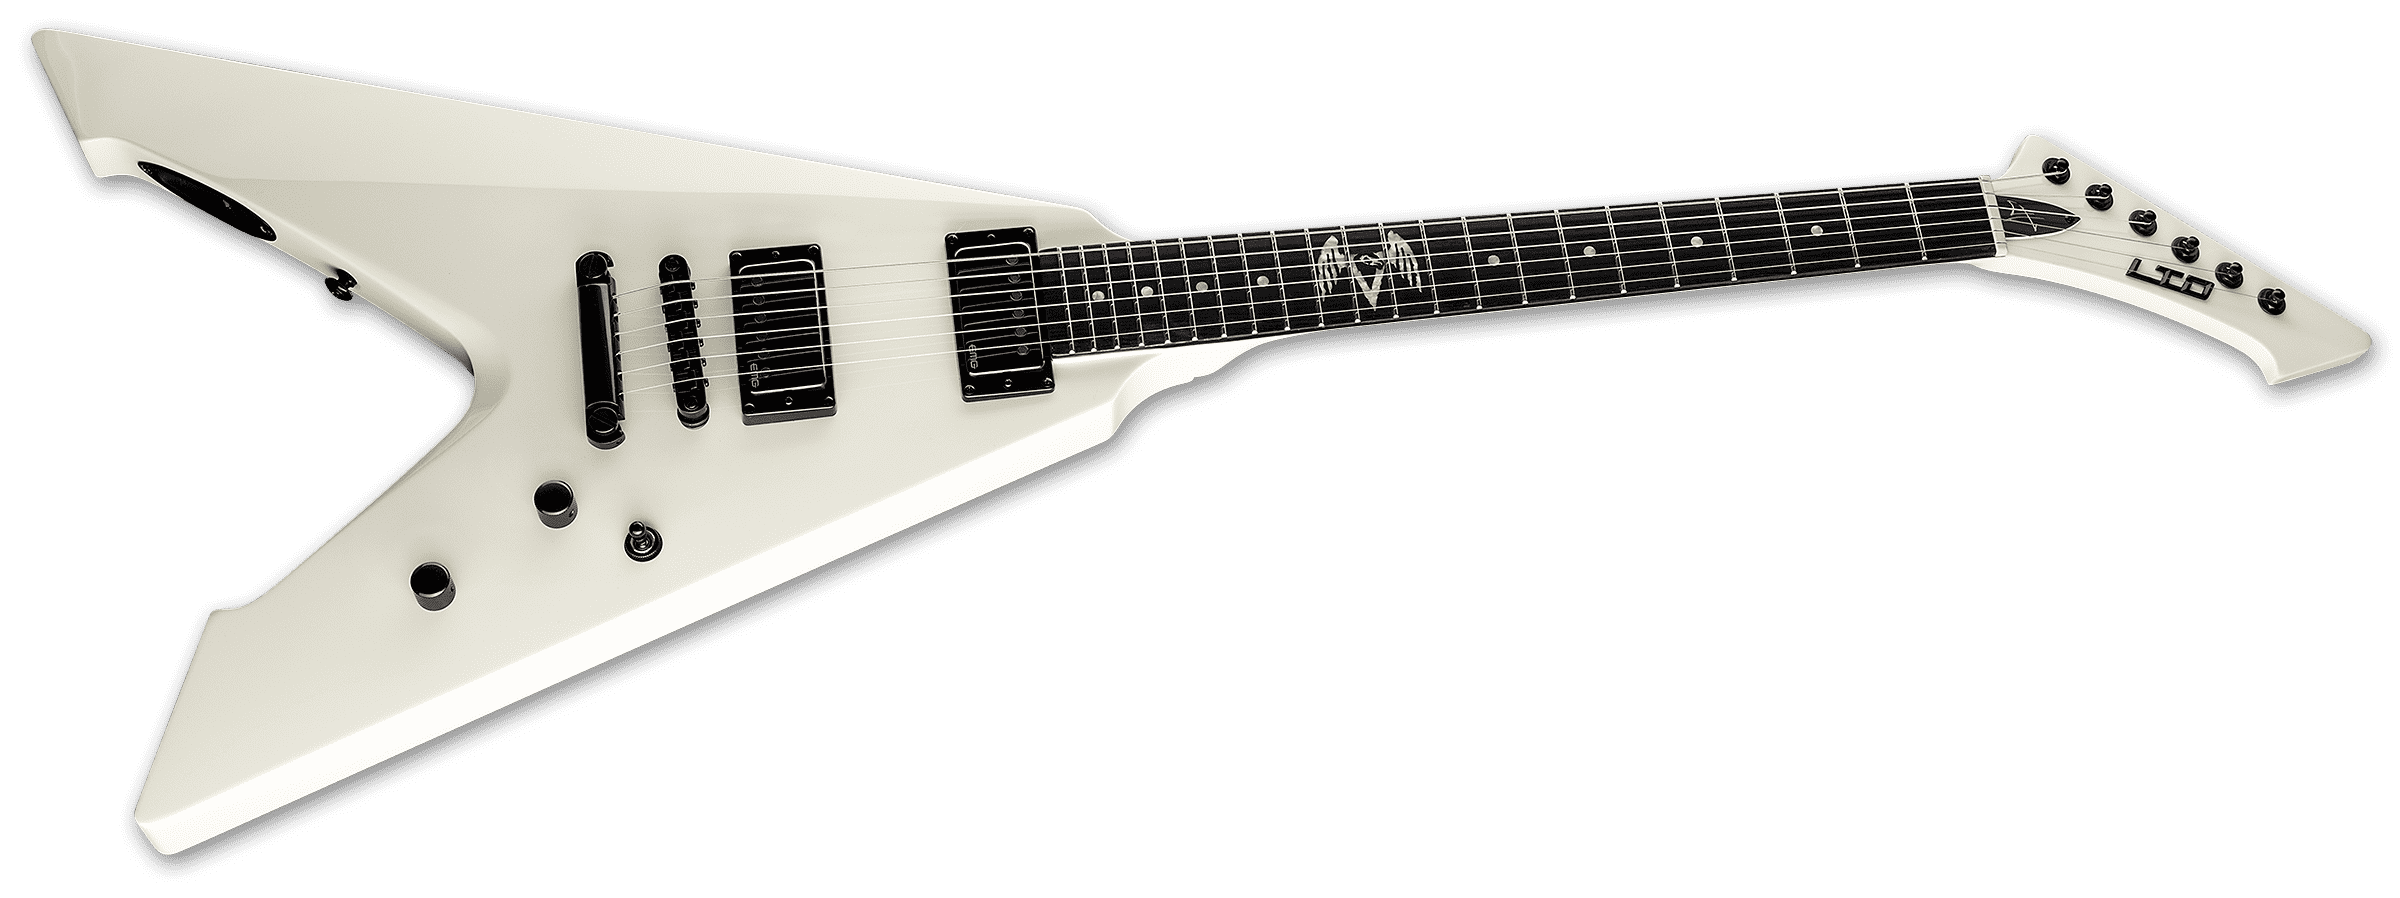 Ltd James Hetfield Vulture Hh Ht Eb - Olympic White - Metal electric guitar - Variation 2